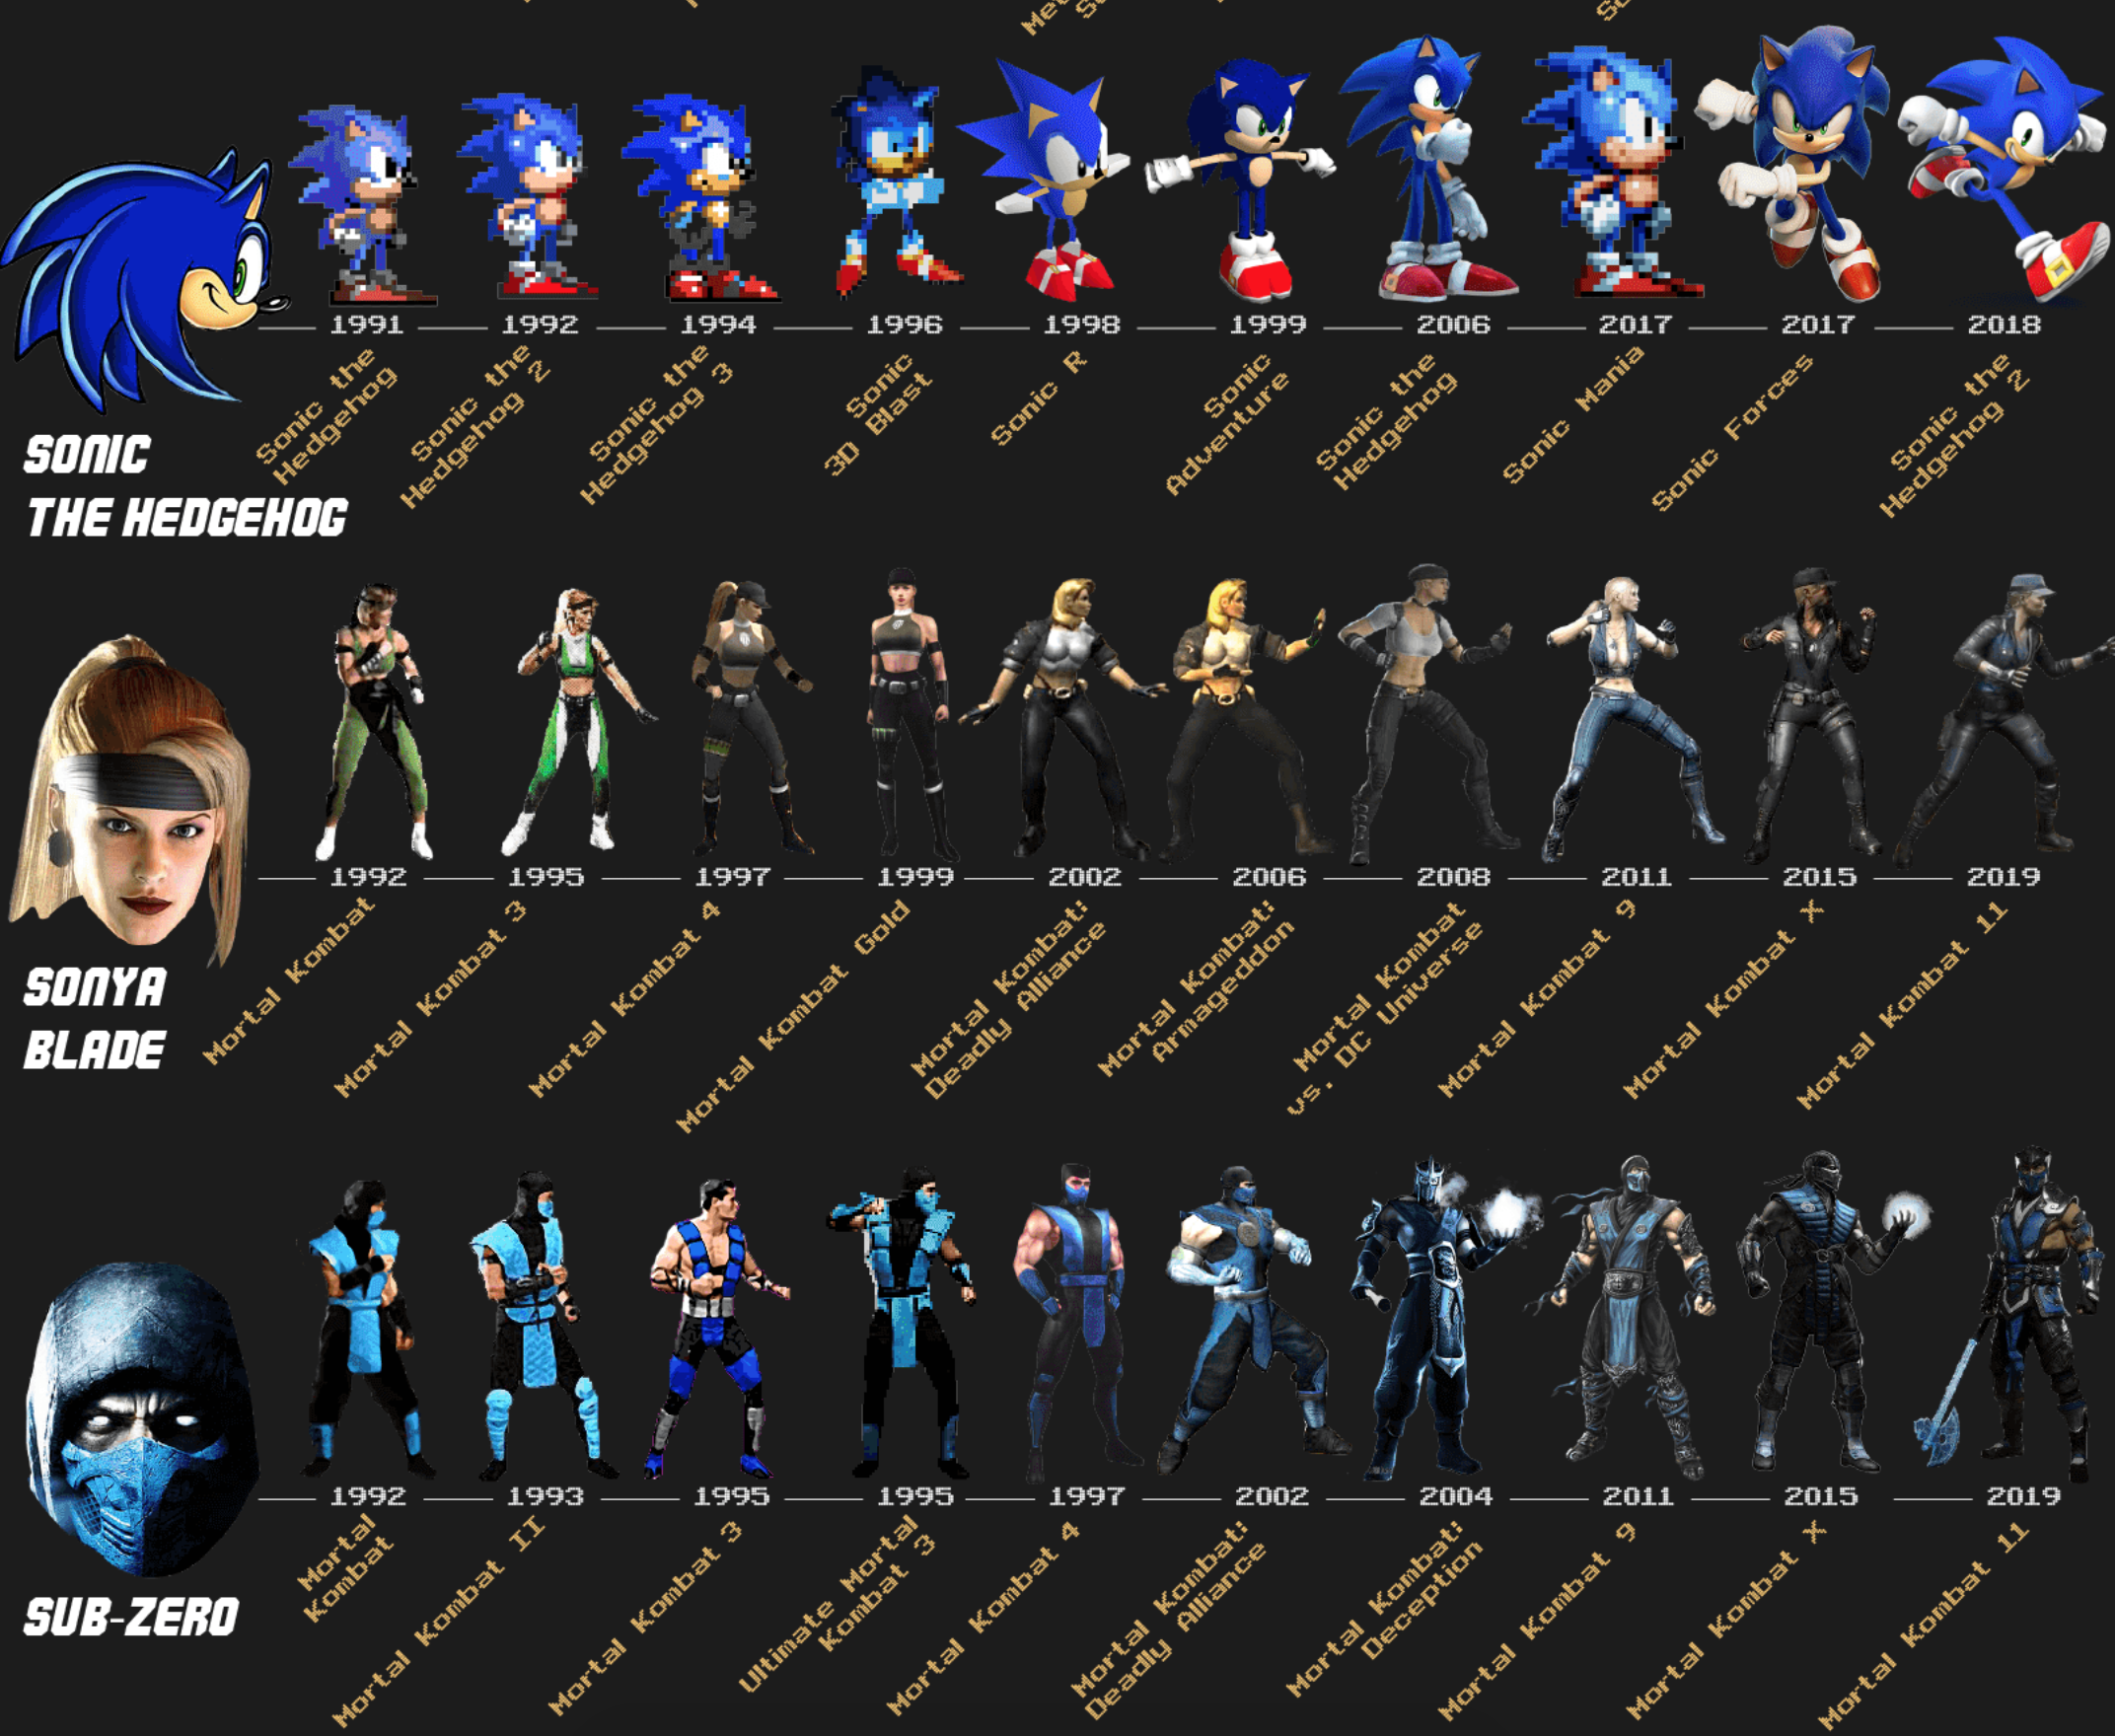 the in-game evolution of video game characters over time - through the years - sonic the hedge hog - Sonya Blade -Sub-Zero